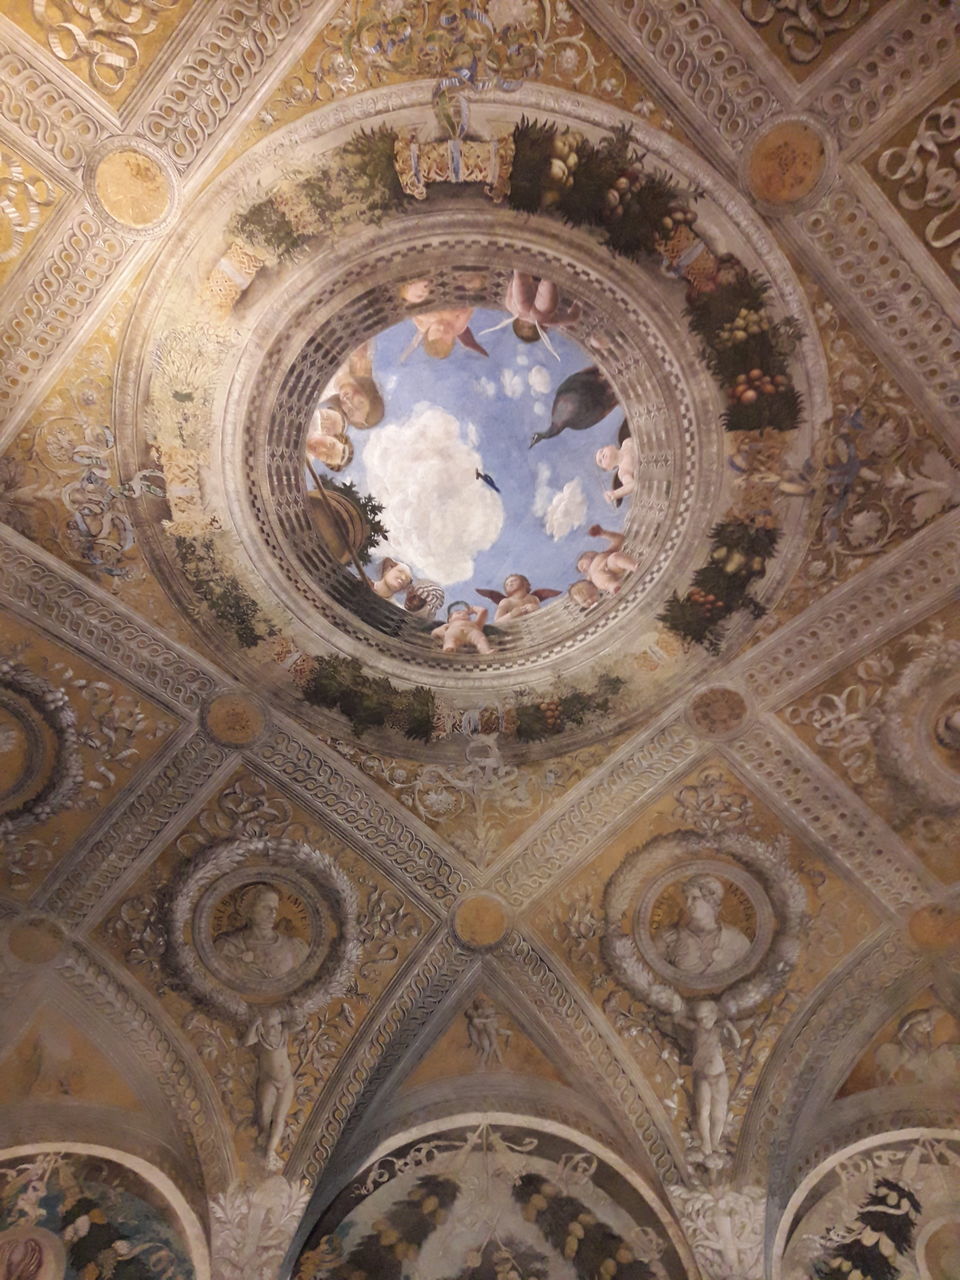 LOW ANGLE VIEW OF ORNATE CEILING IN A BUILDING